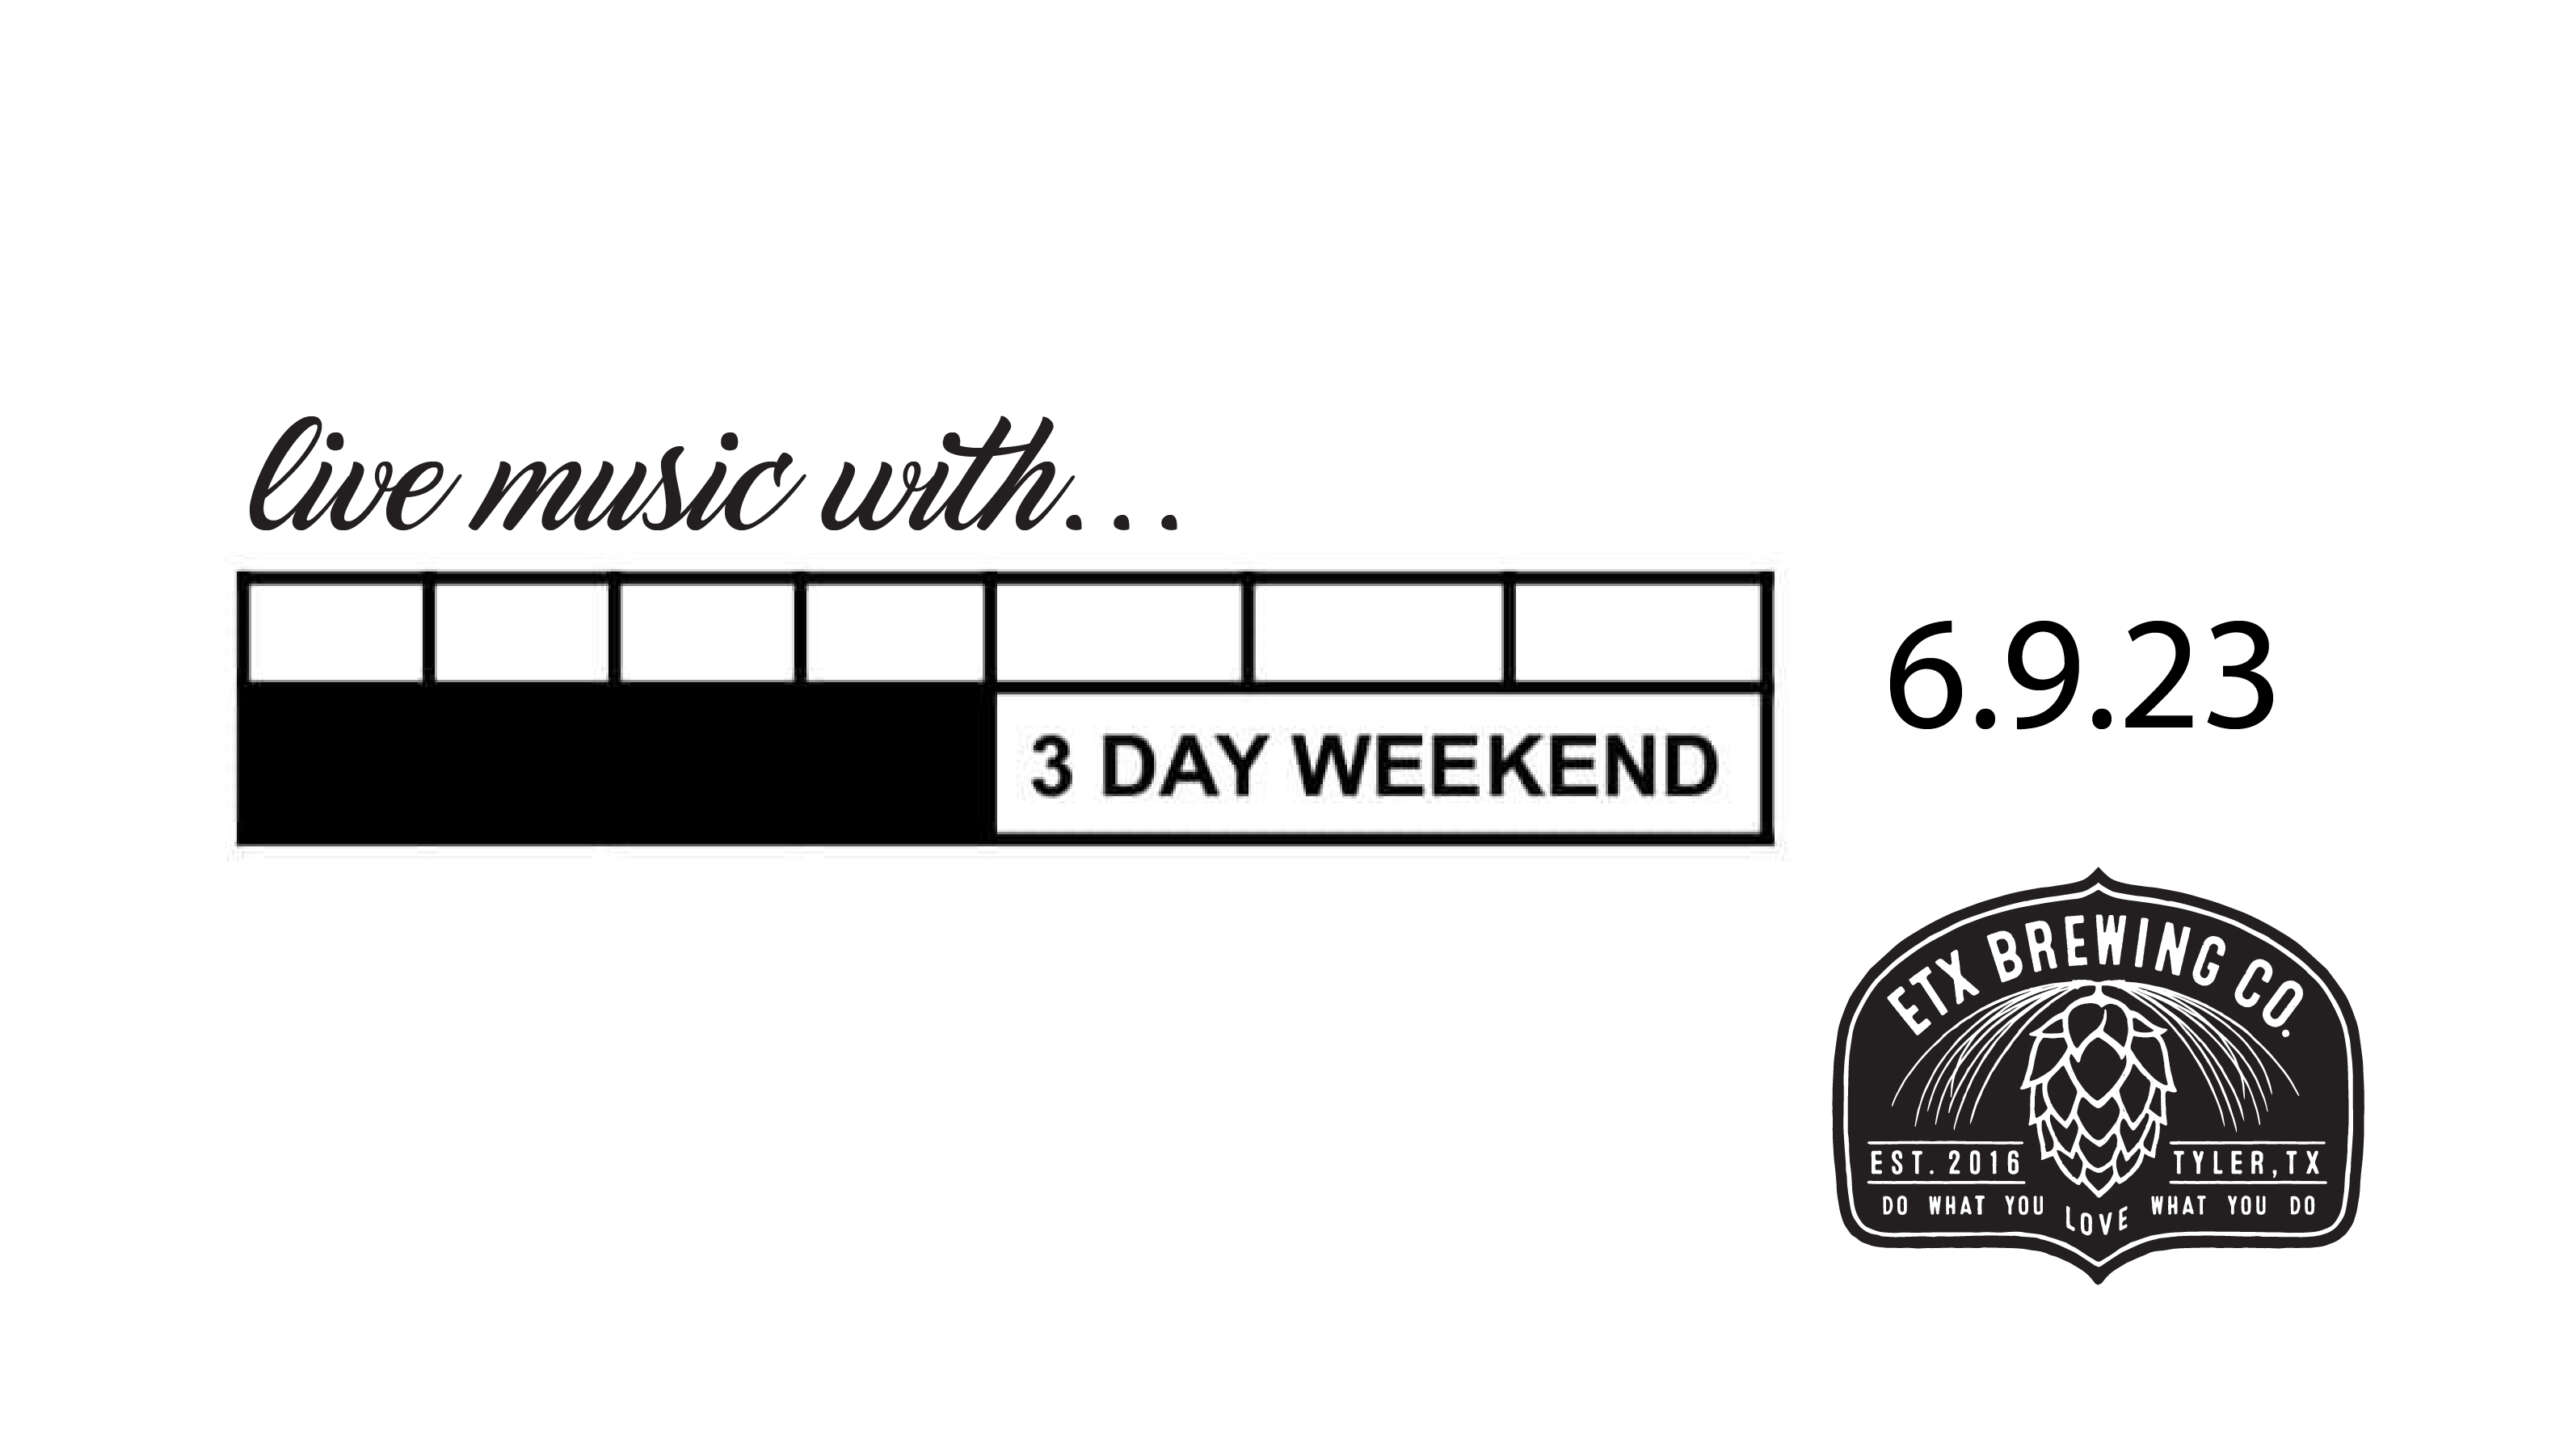 Live Music with 3 Day Weekend at ETX Brewing Co.